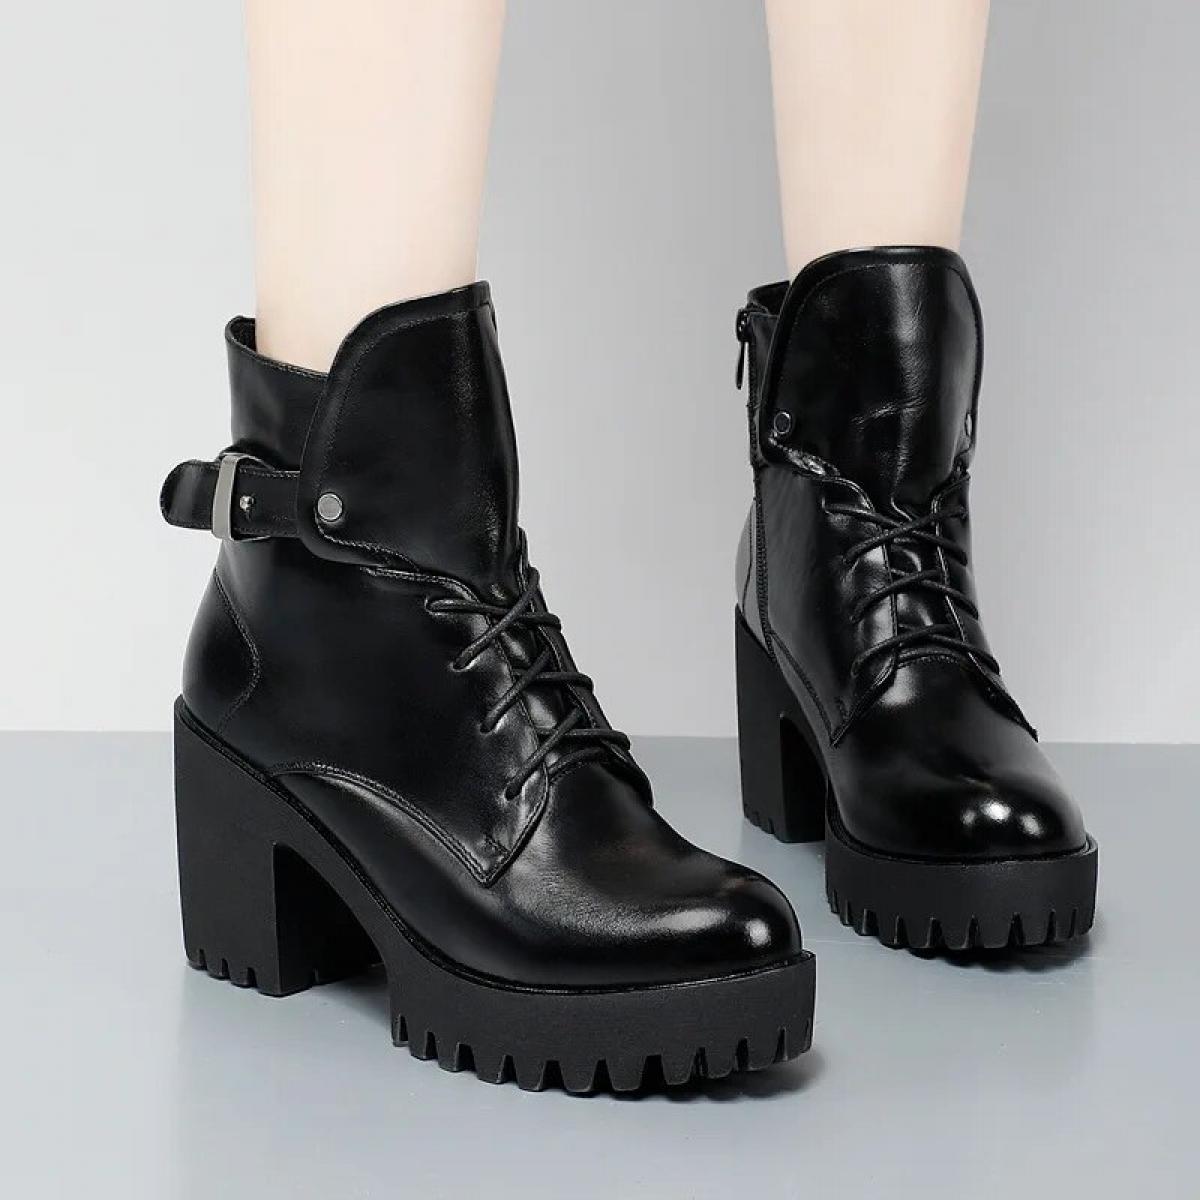 Ankle Boots Female Women Shoes Winter Thick Heel Platform Boots Footwear Ladies Comfortable Outdoor British Style Sports